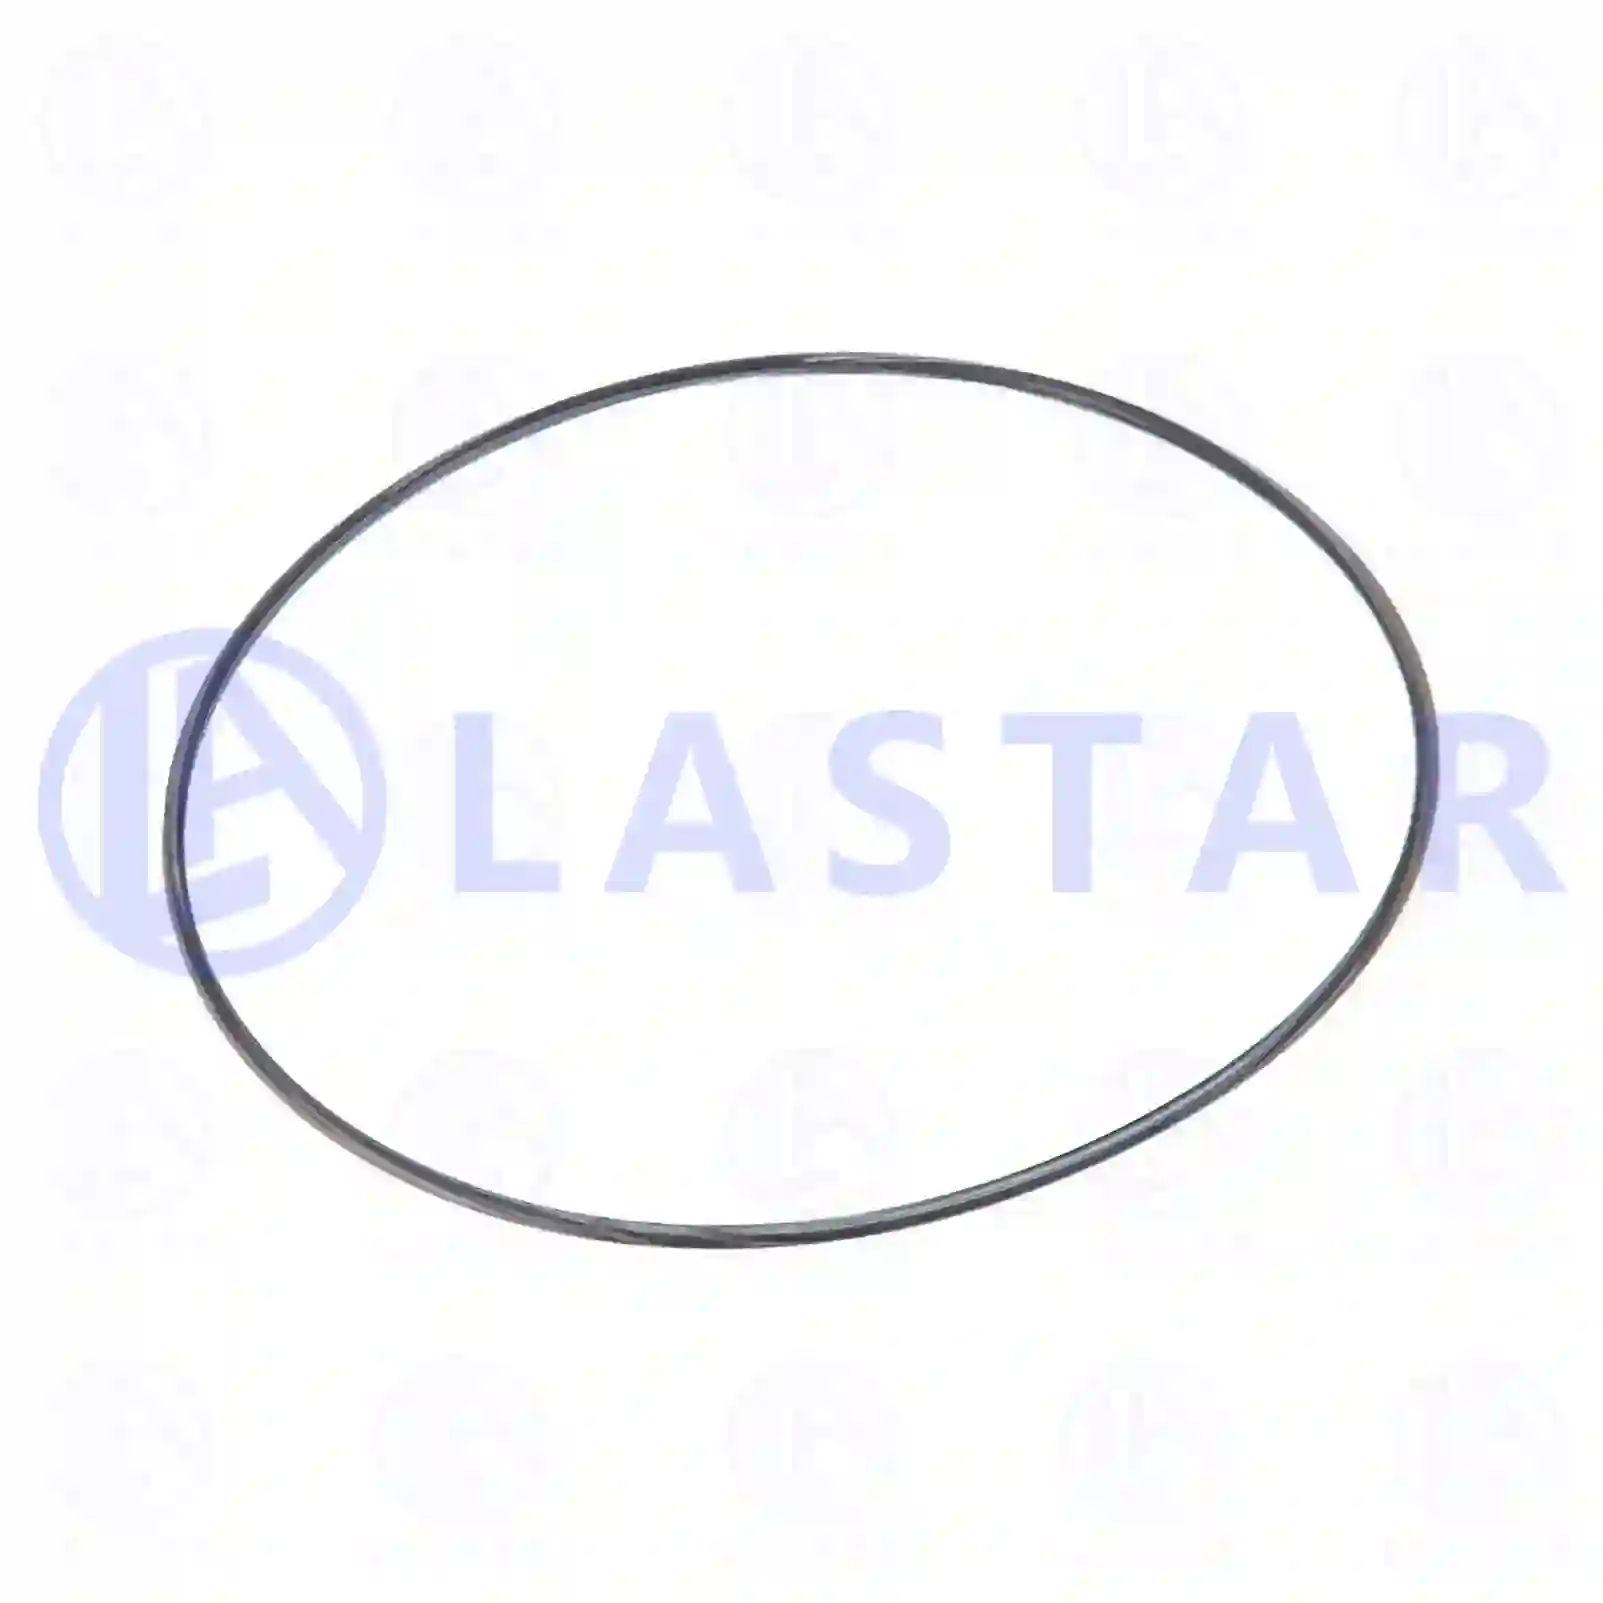 O-ring, 77701460, 229973448, 022997 ||  77701460 Lastar Spare Part | Truck Spare Parts, Auotomotive Spare Parts O-ring, 77701460, 229973448, 022997 ||  77701460 Lastar Spare Part | Truck Spare Parts, Auotomotive Spare Parts